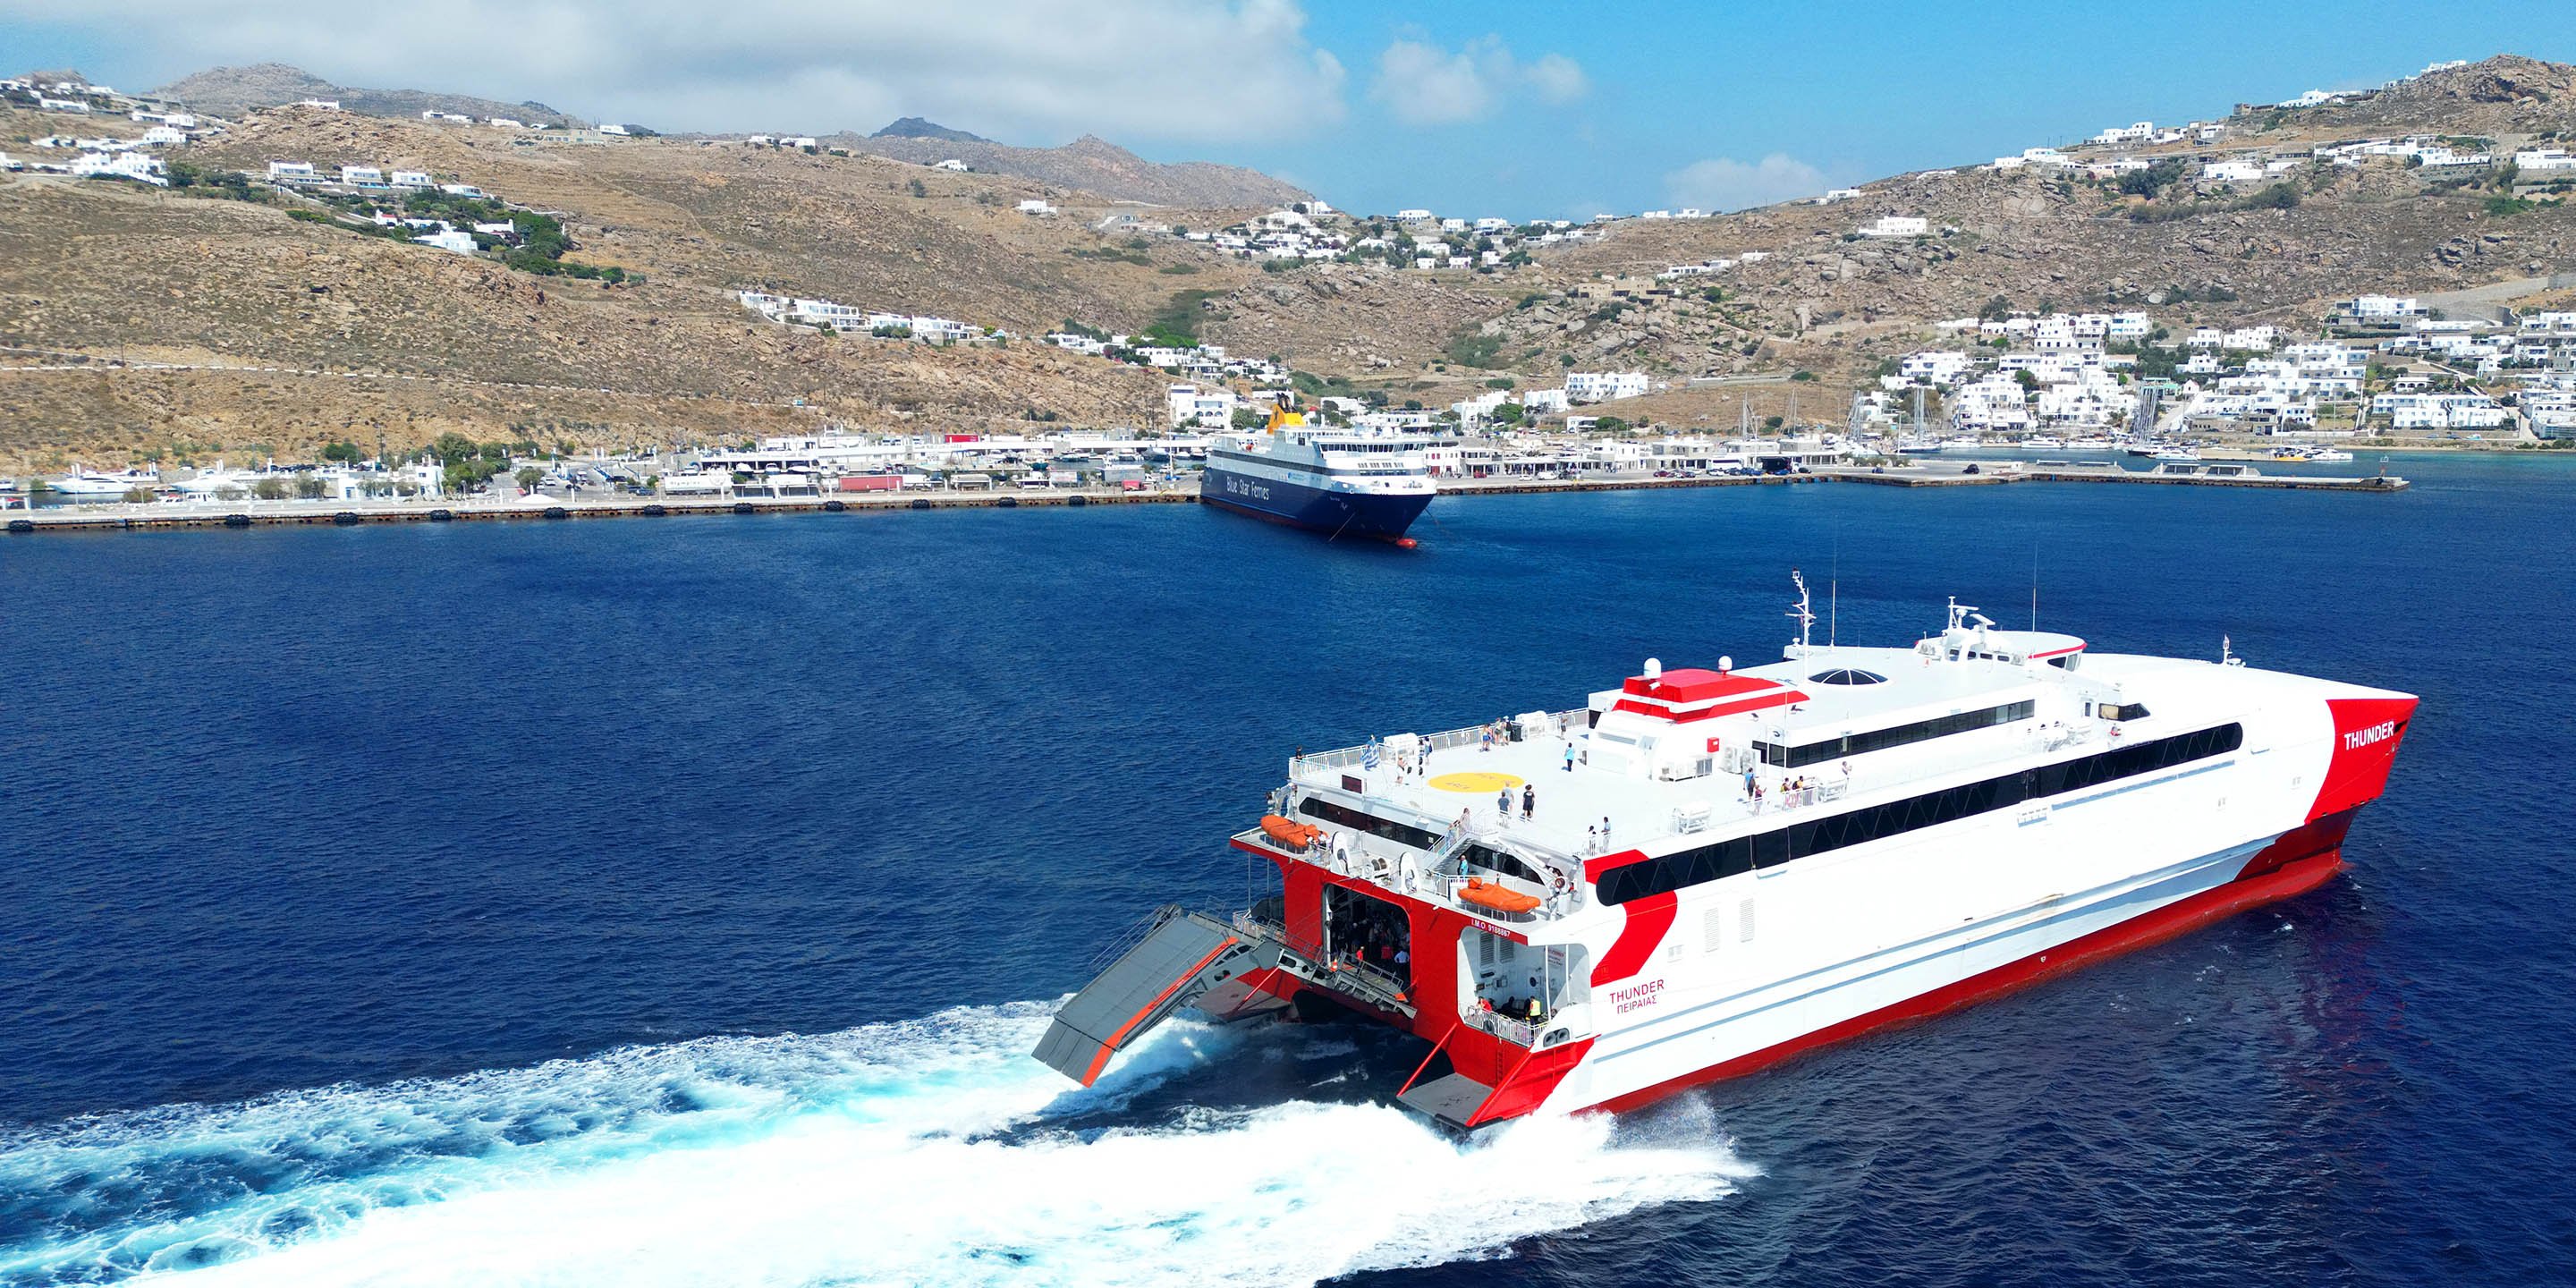 The high-speed ferry Thunder arriving at the new port of Mykonos, from Athens